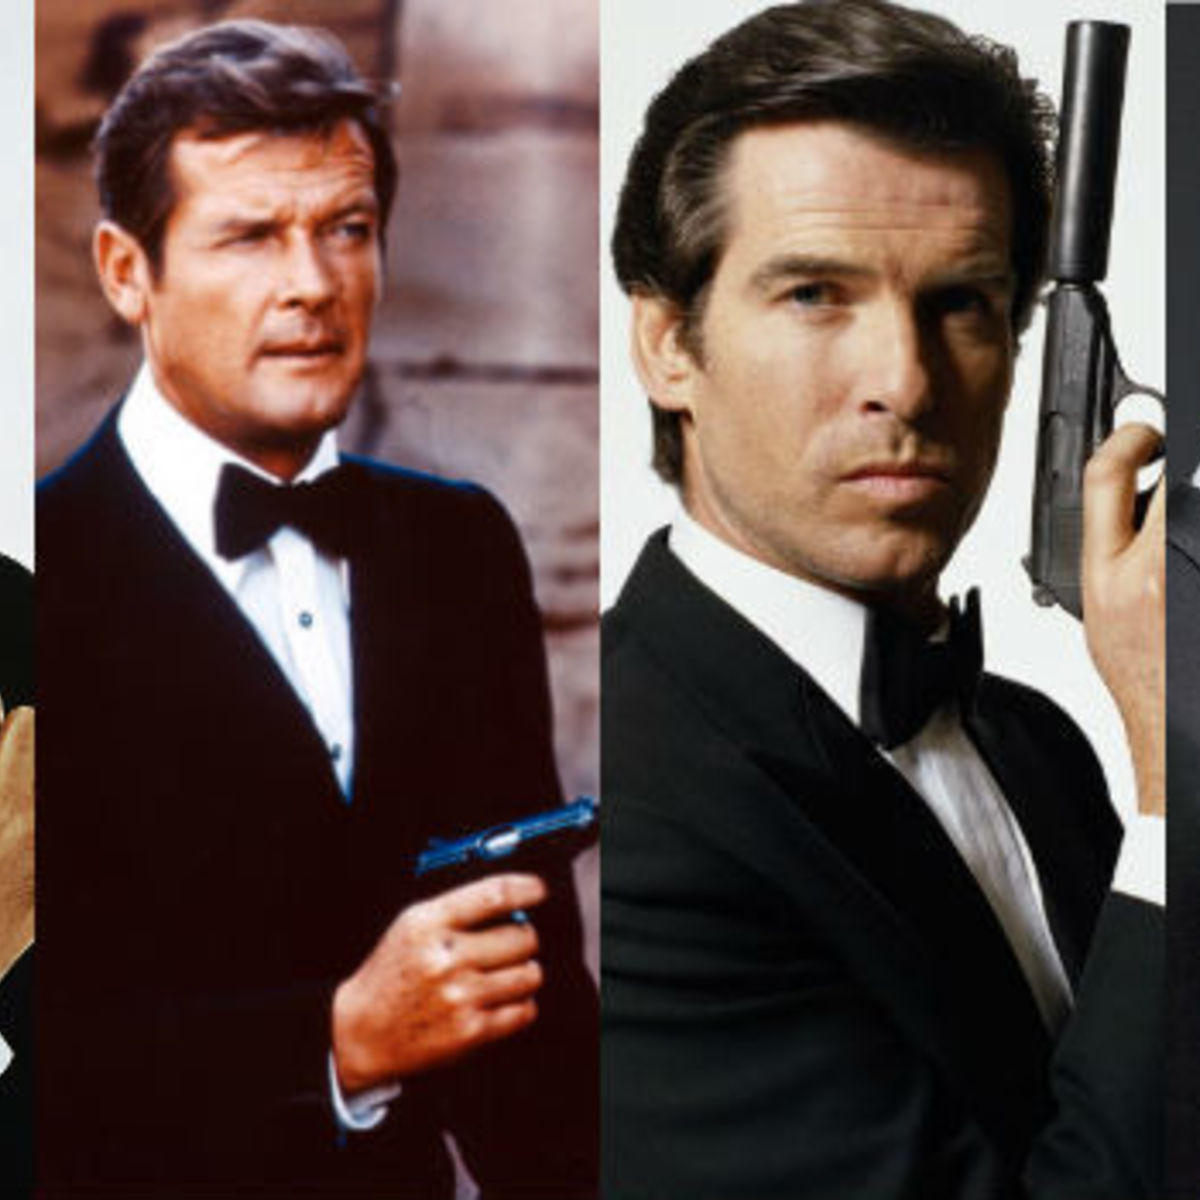 Every James Bond Movie Ranked From Worst To Best